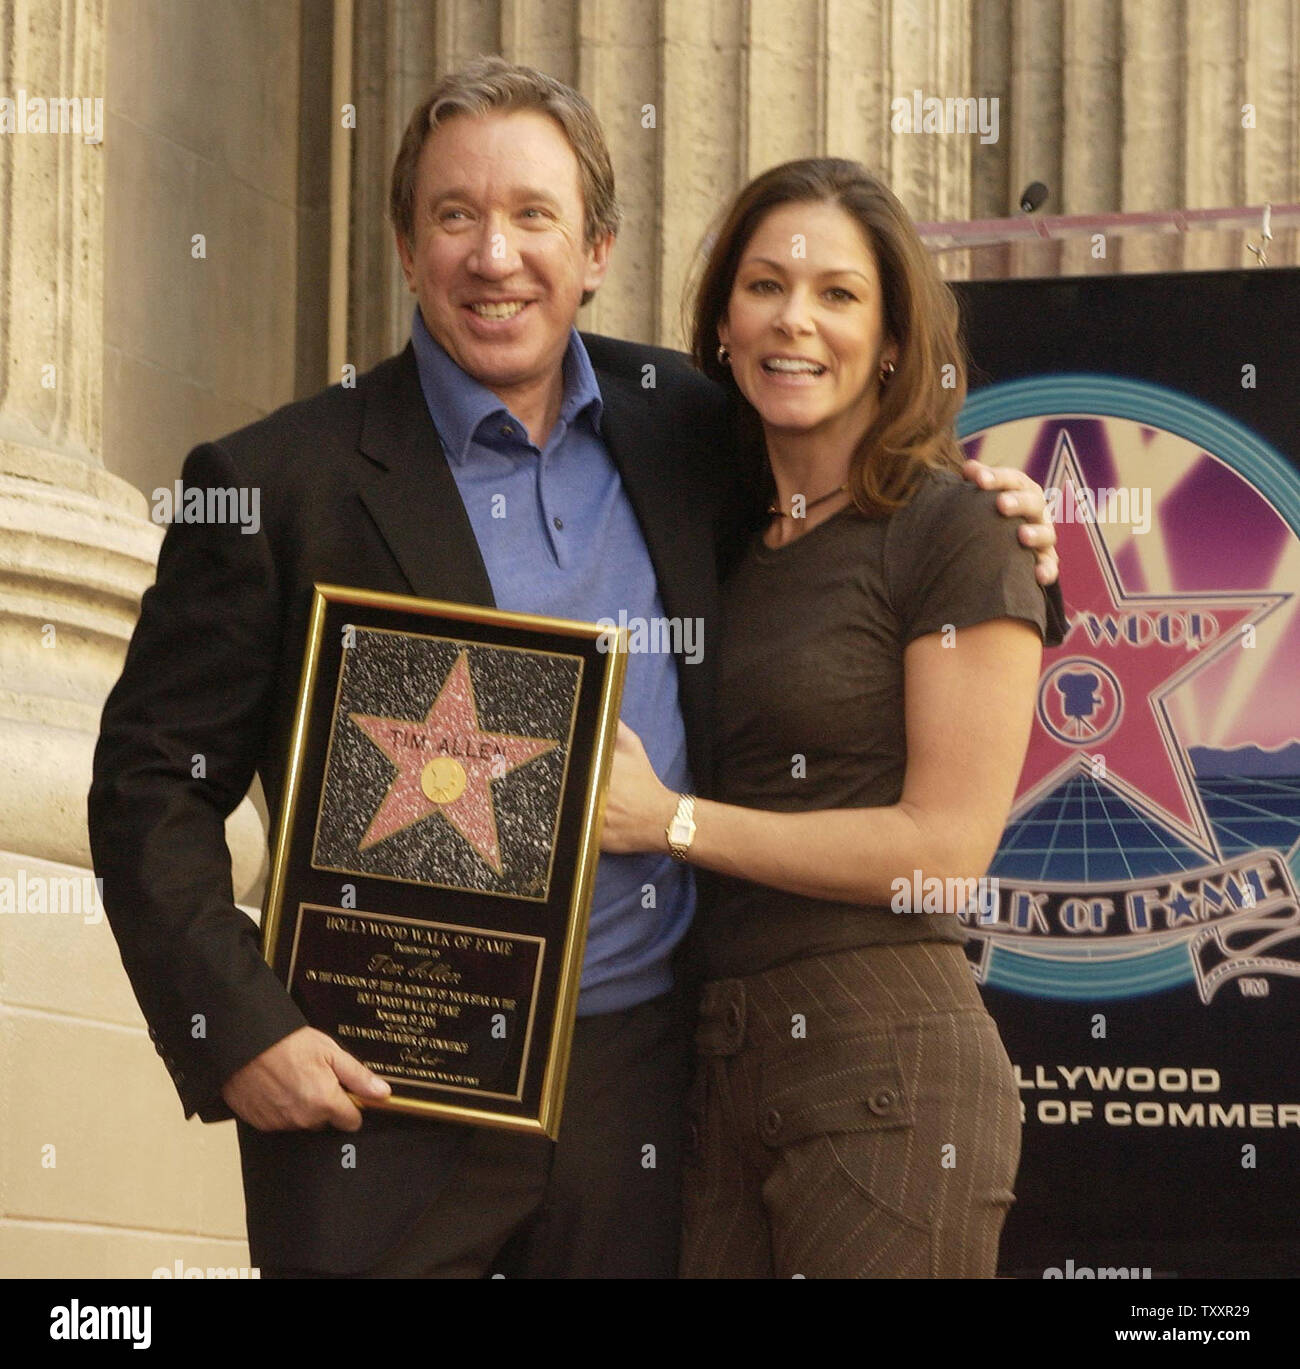 Actor Tim Allen poses with his girlfriend Jane Hajduk atop his newly unveiled star on the Hollywood Walk of Fame during ceremonies along Hollywood Boulevard in Hollywood November 19, 2004. Allen, best known for his comedy television series 'Home Improvement' currently stars in the family comedy film 'Christmas with the Kranks.' (UPI Photo/Jim Ruymen) Stock Photo